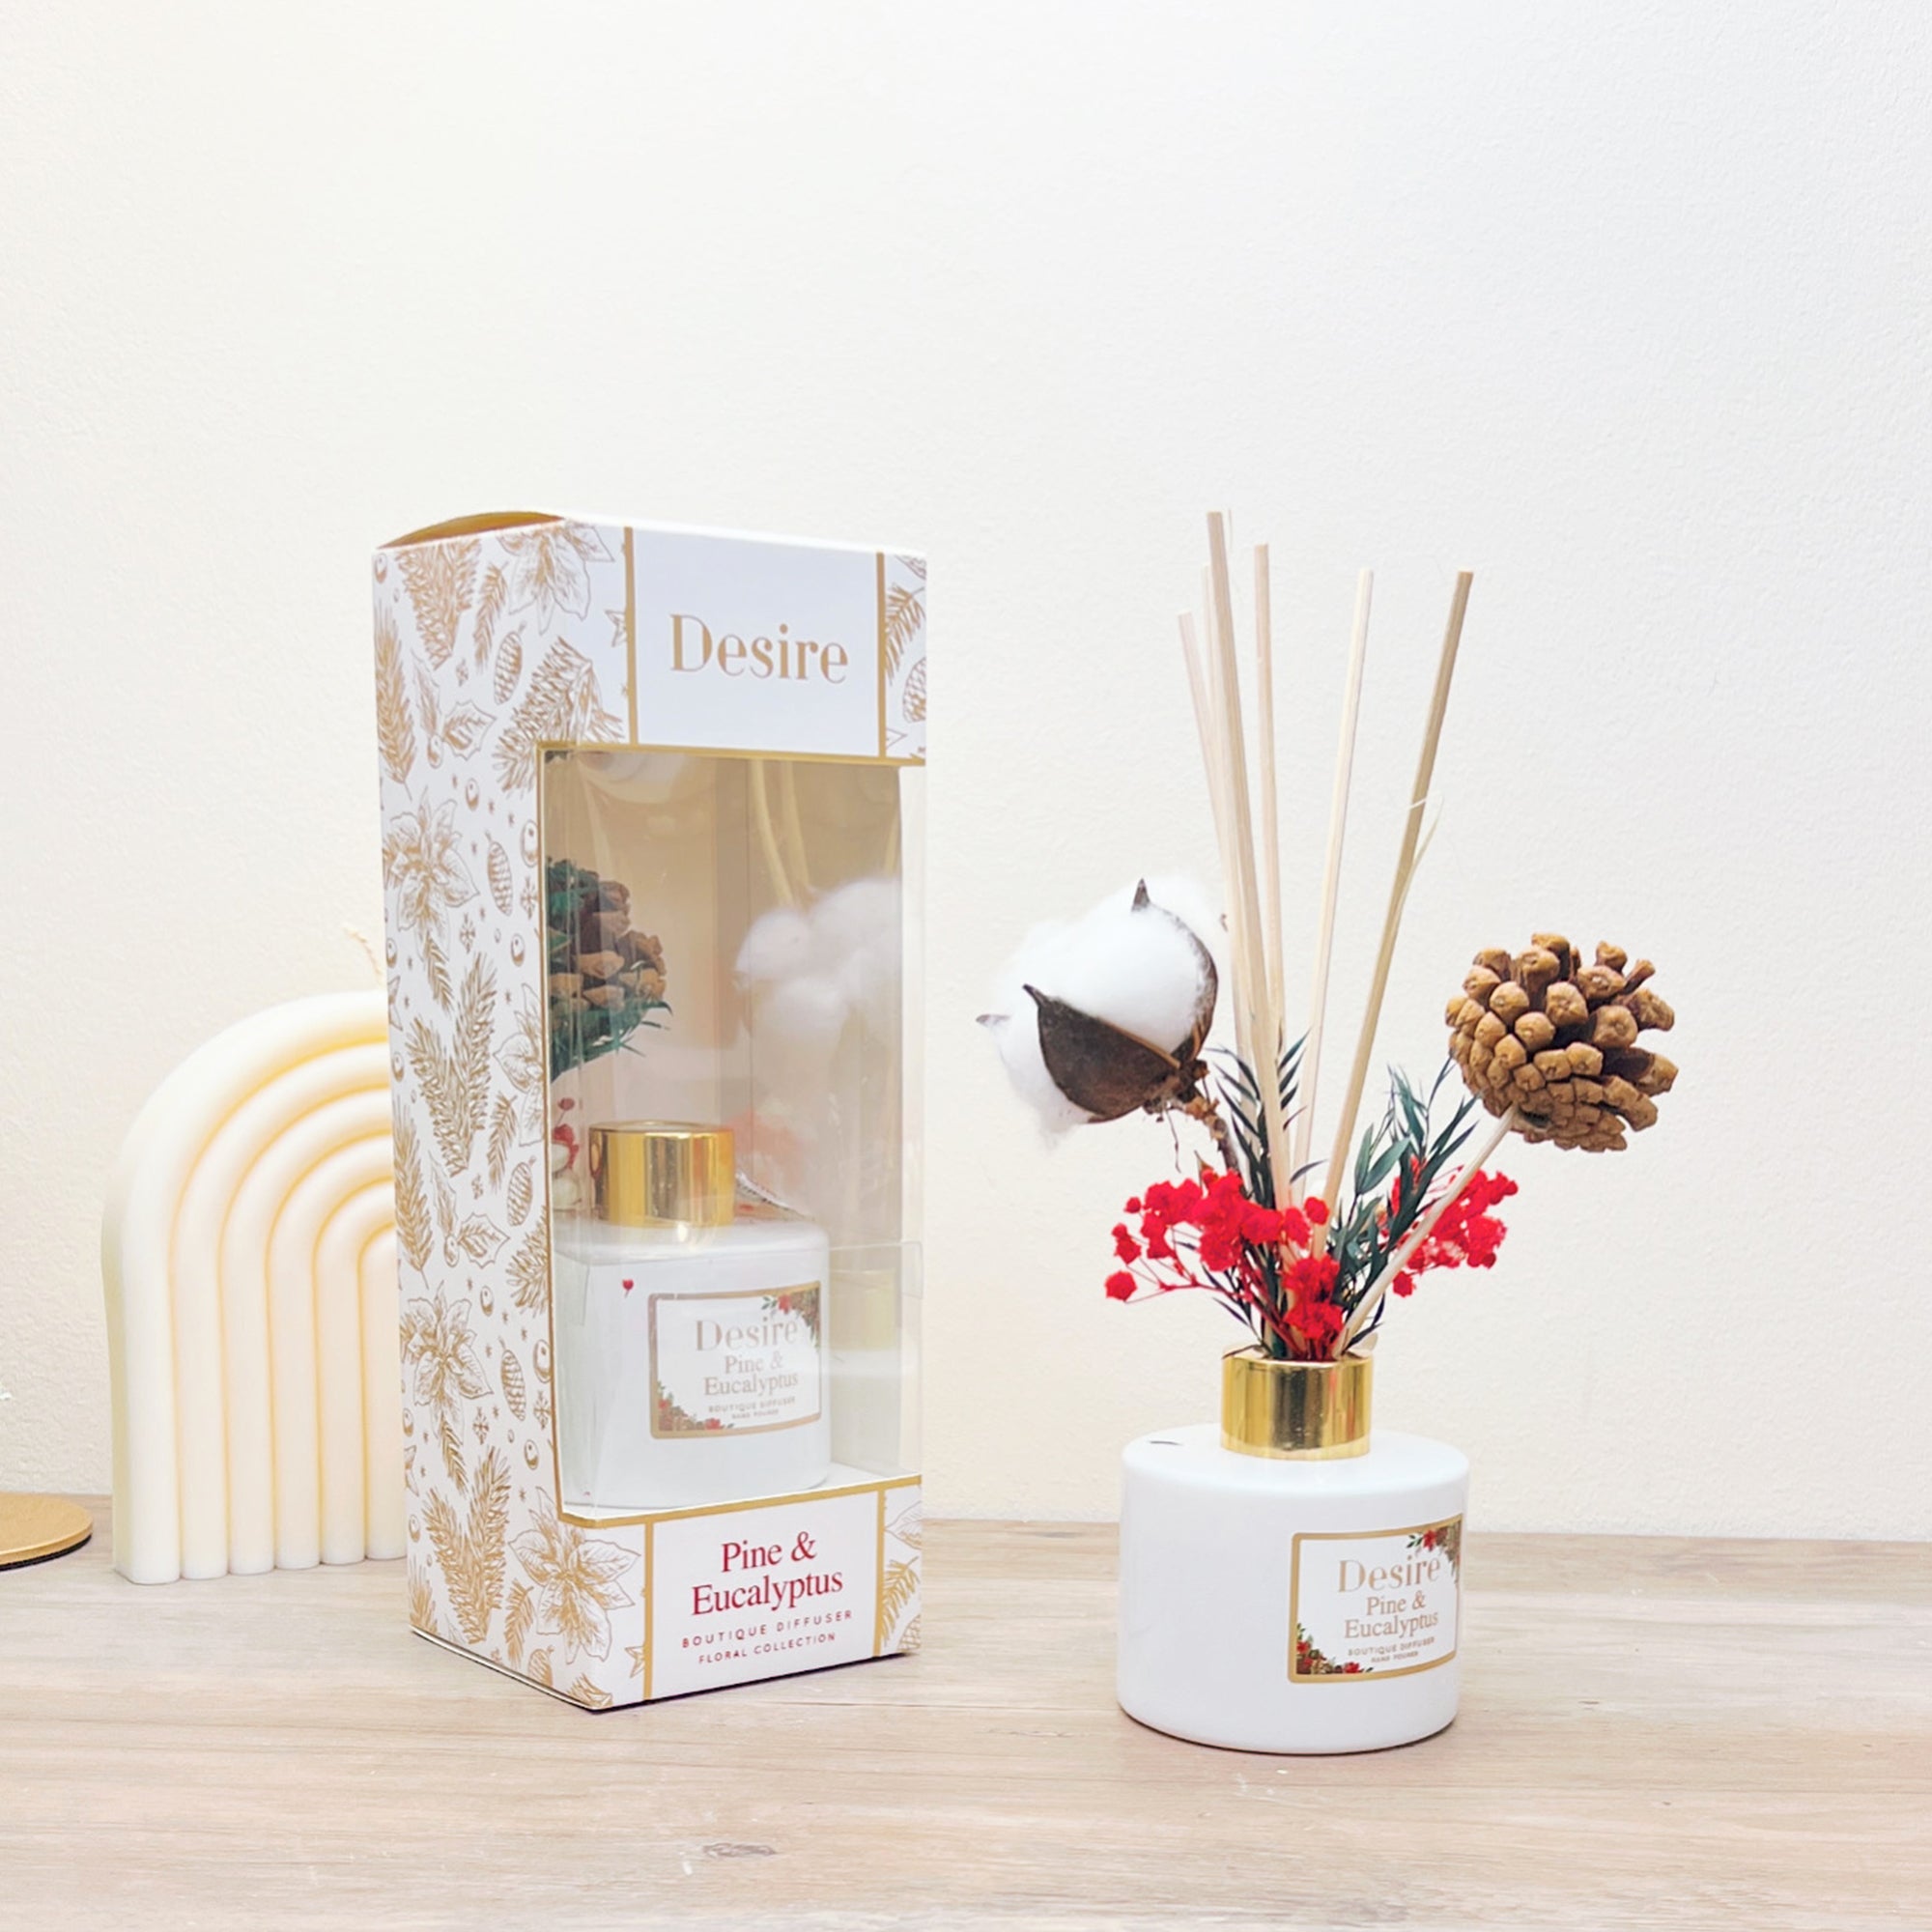 Christmas Reed Diffuser with Pine & Eucalyptus Scent - Secret Santa Gifts